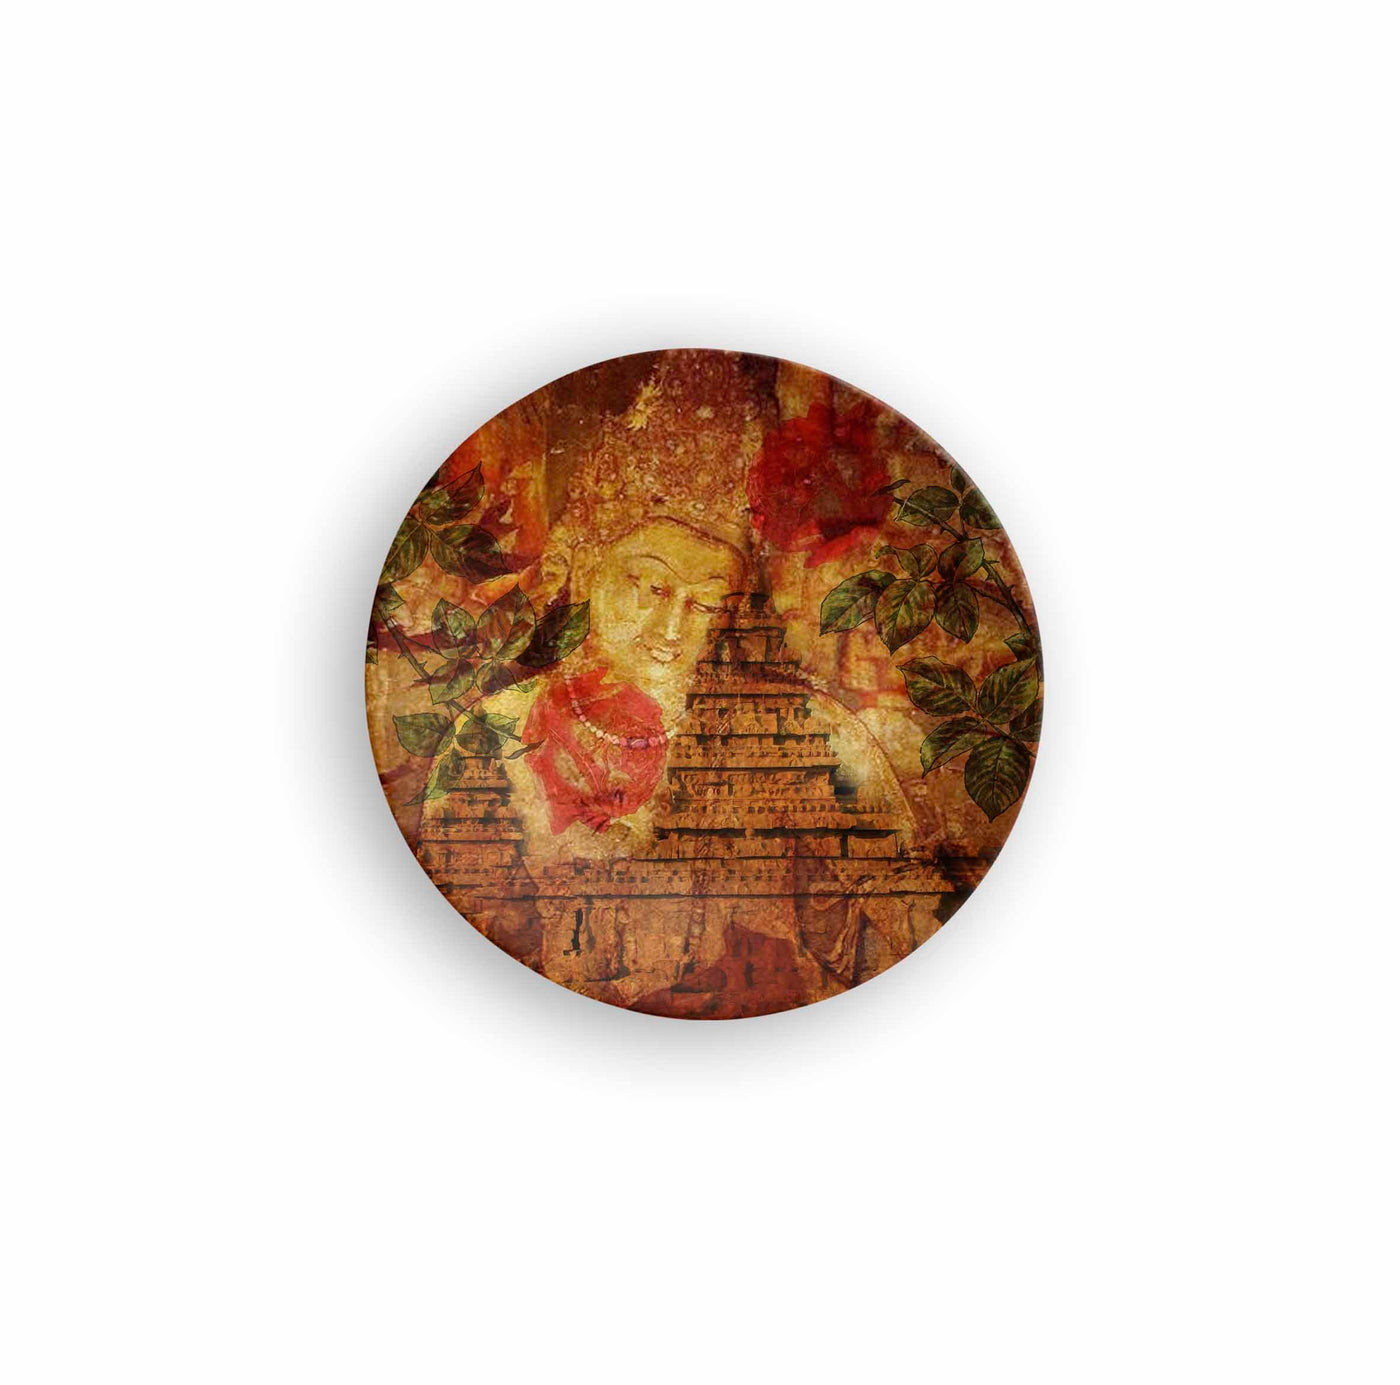 Indian Heritage Decorative Wall Plates - Wall Decor - 4